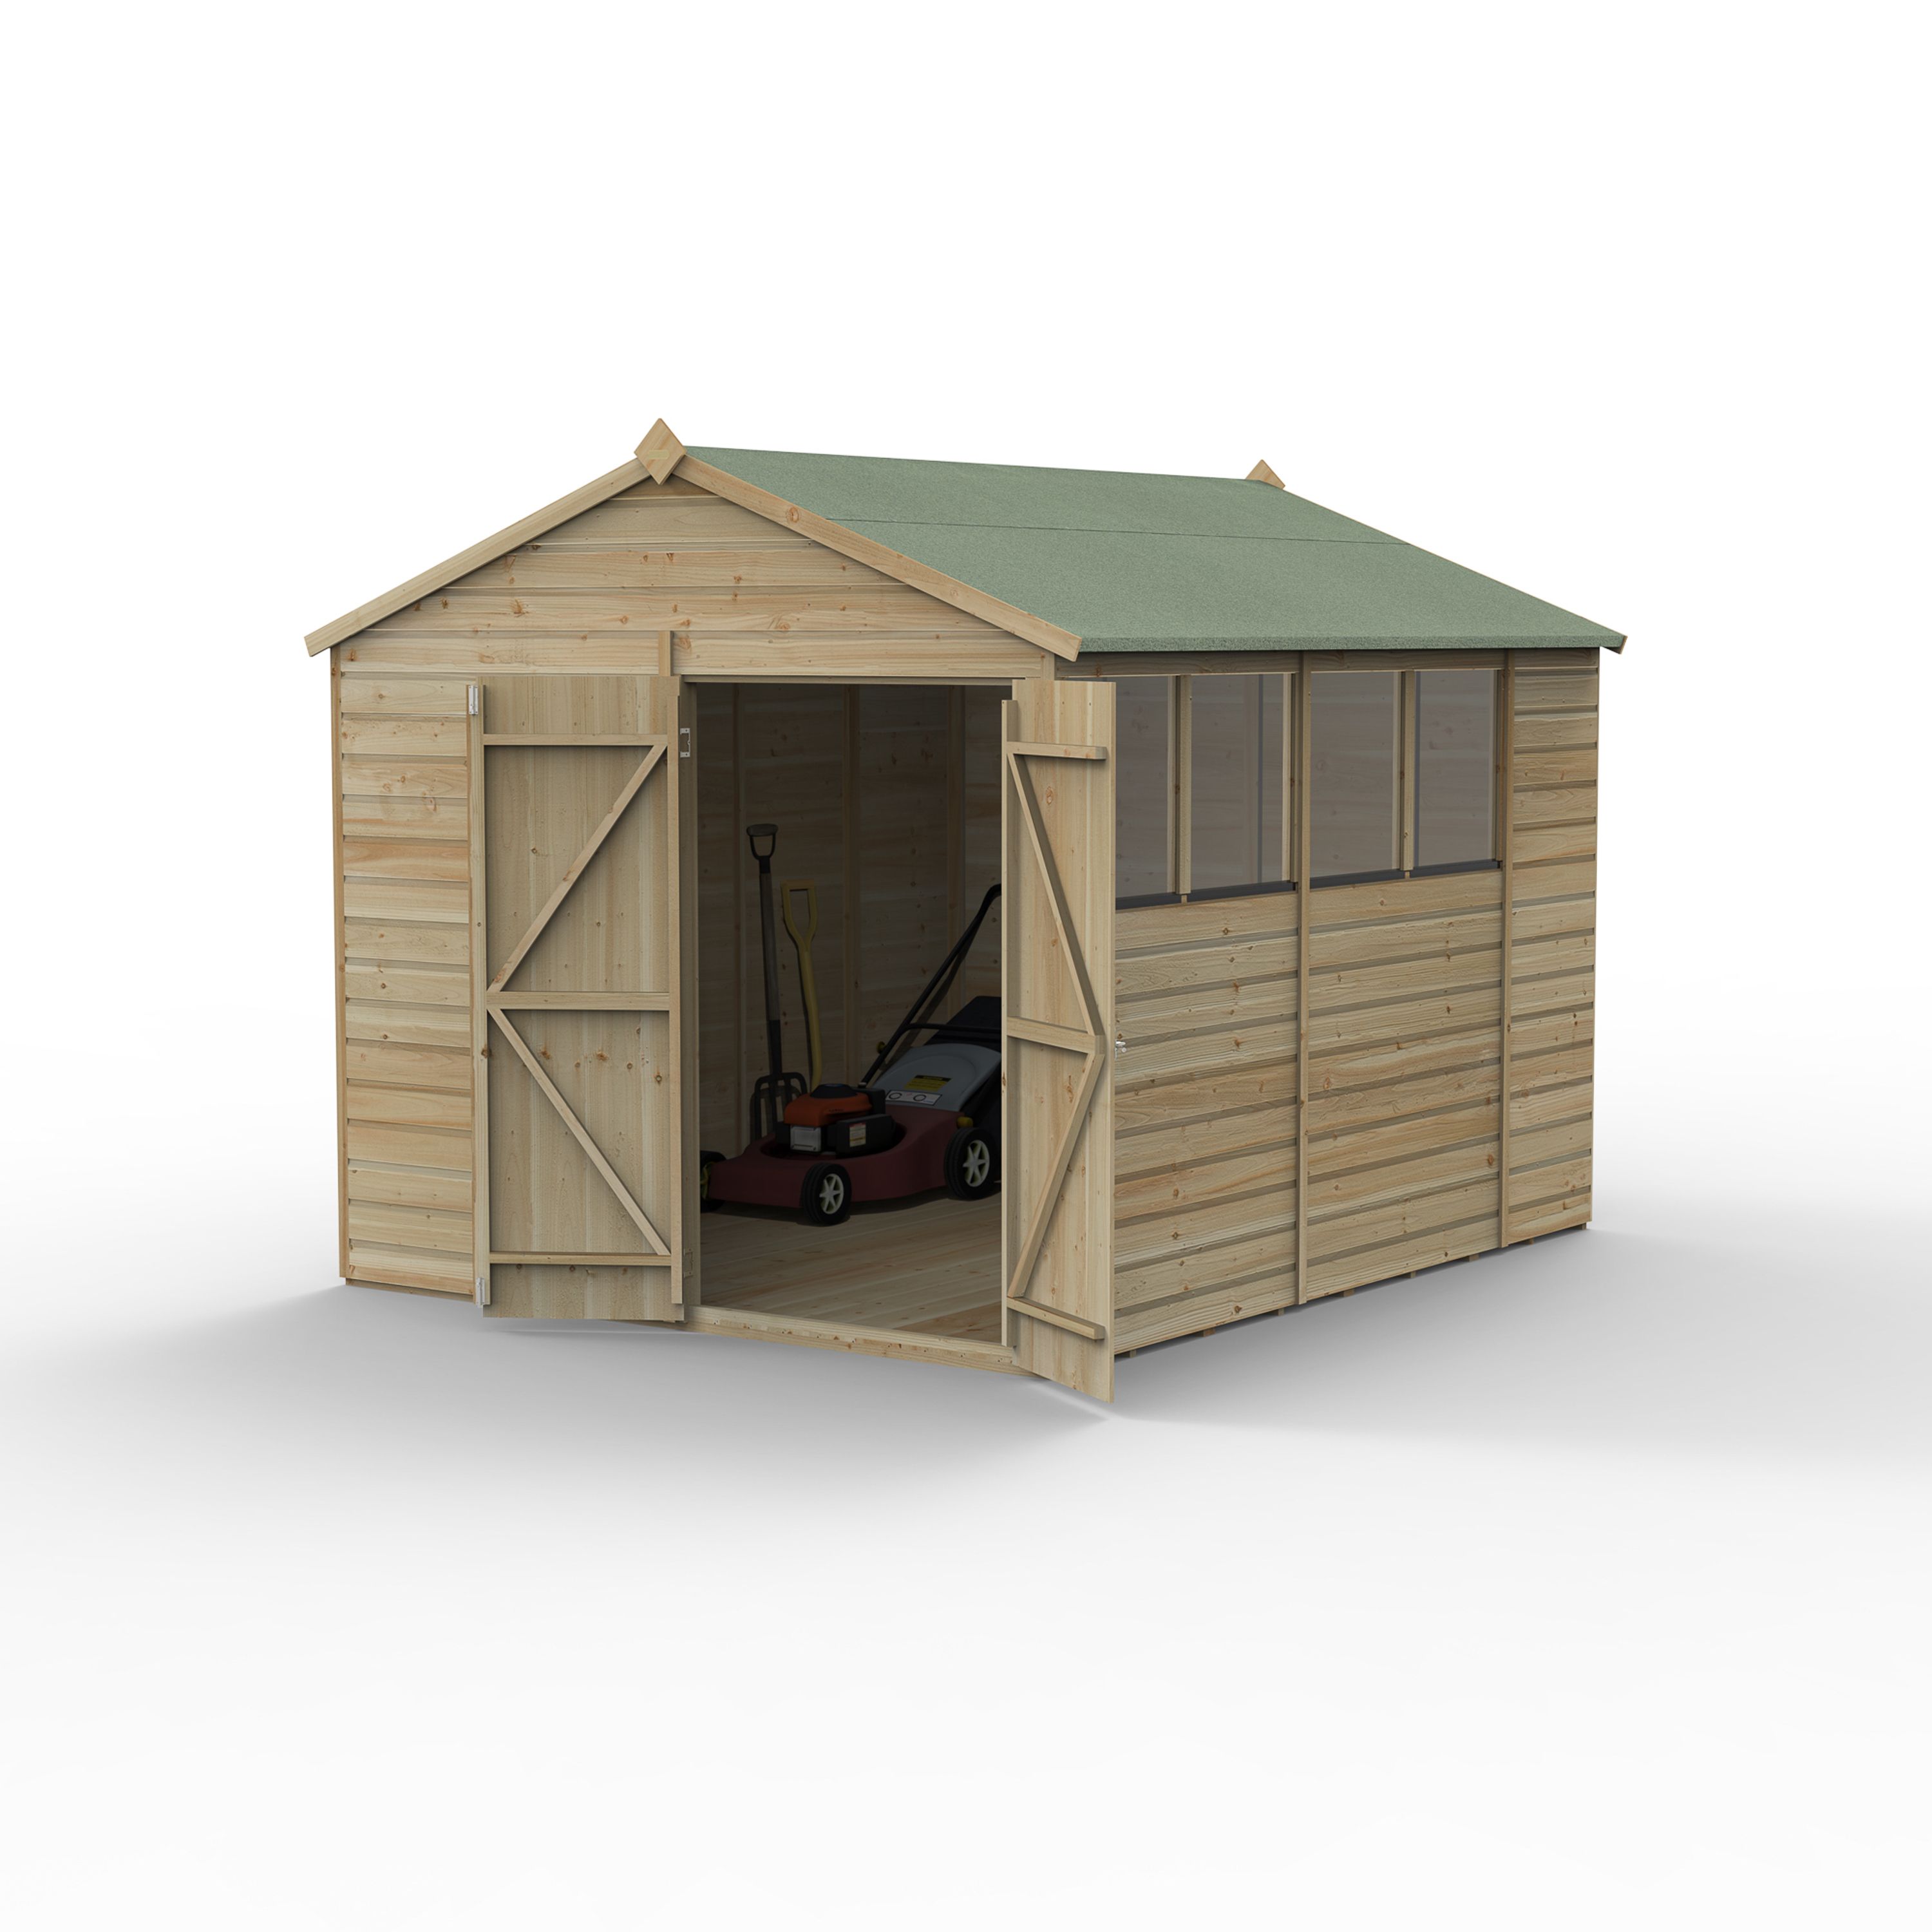 Forest Garden Beckwood 10x8 ft Apex Natural timber Wooden 2 door Shed with floor & 4 windows - Assembly not required